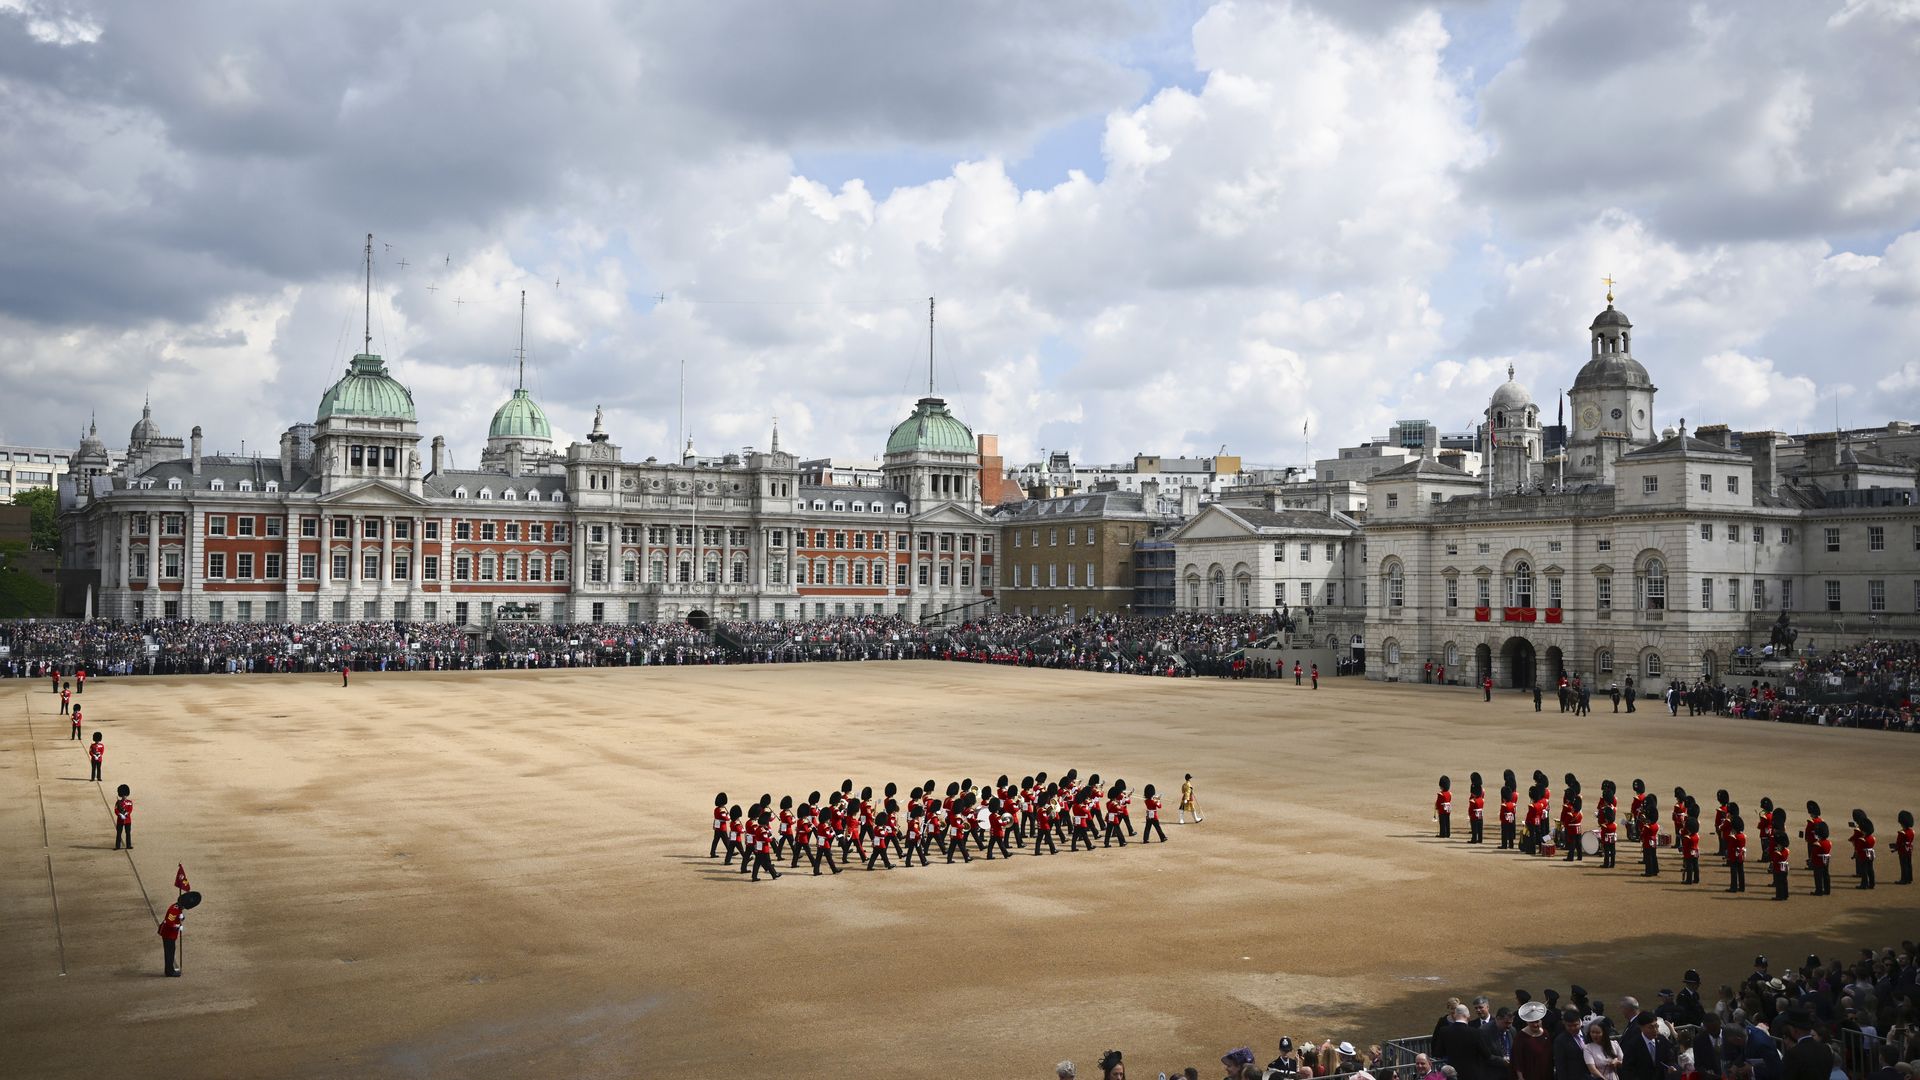 Household Division foot guards march during the Trooping the Colour parade in London today to celebrate the 70-year reign of Queen Elizabeth II, age 96.